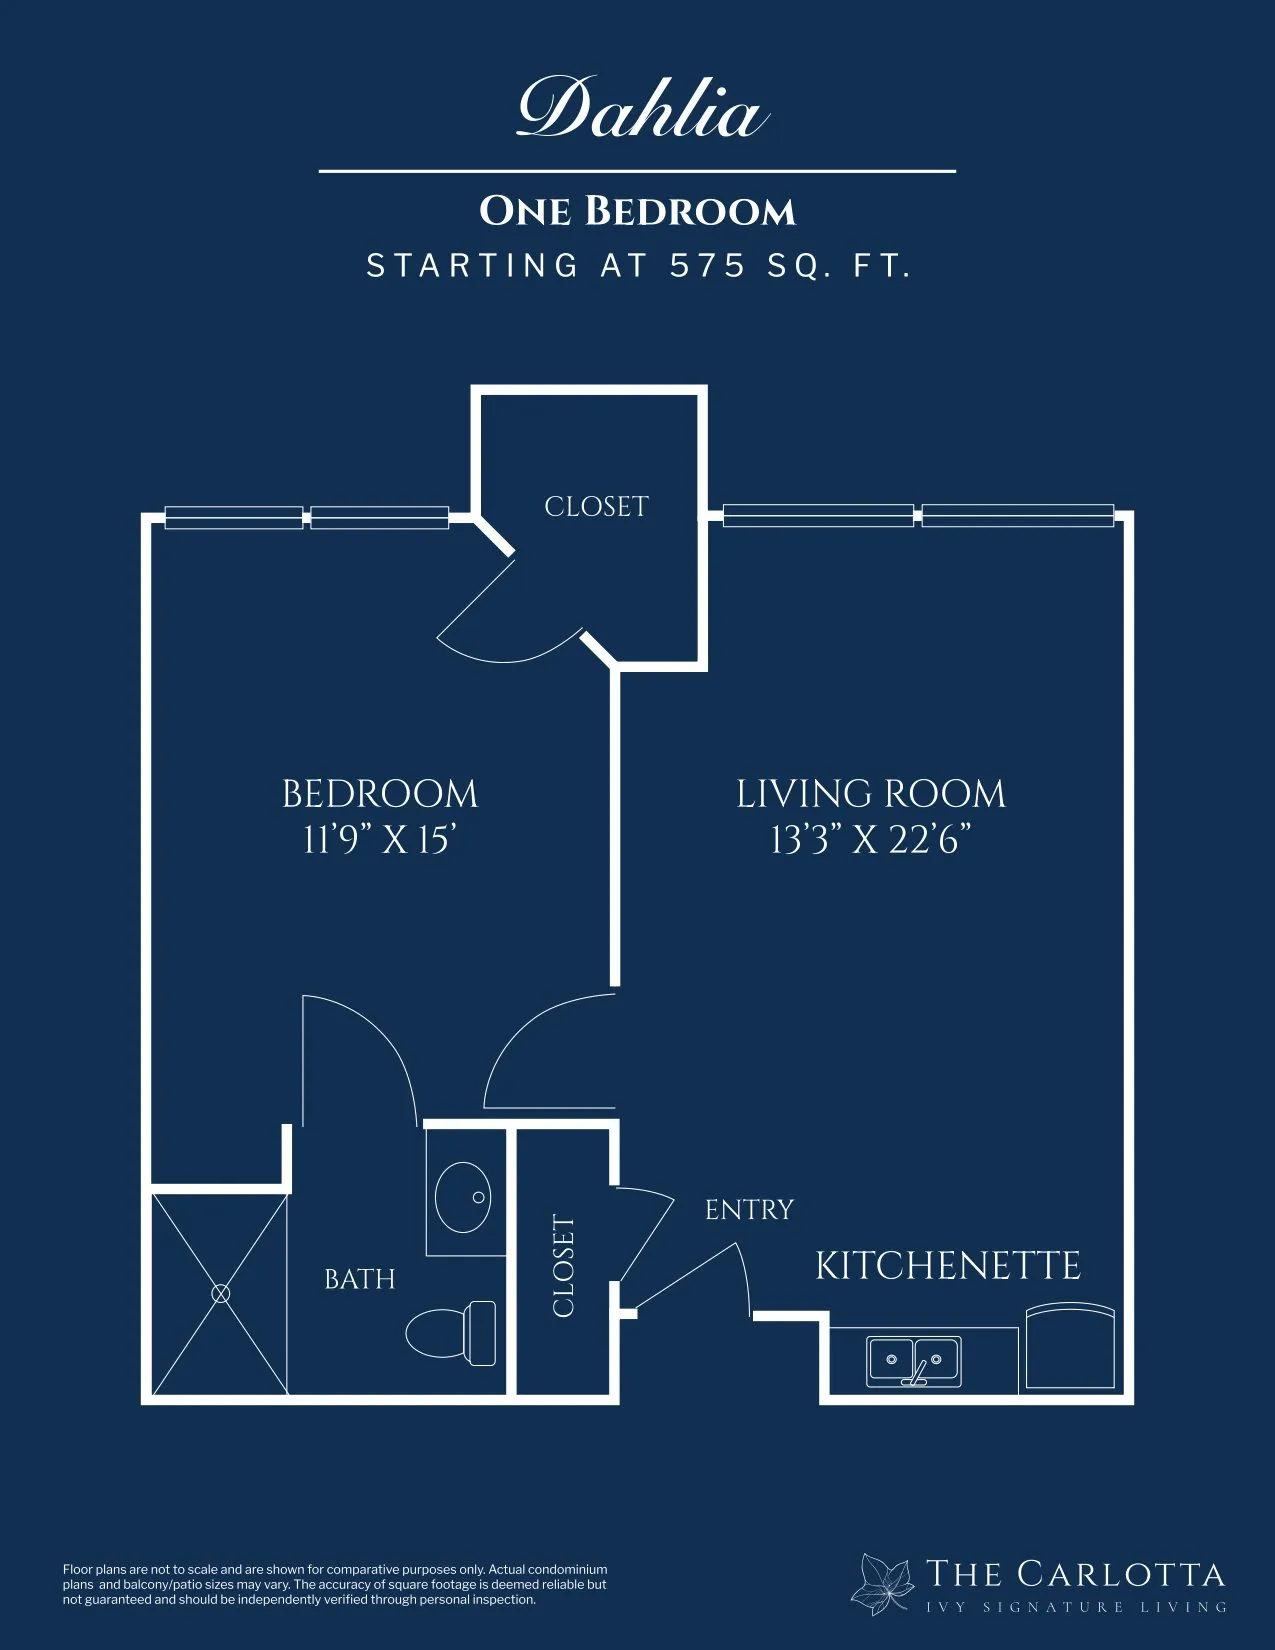 Dahlia. One bedroom starting at 575 square feed